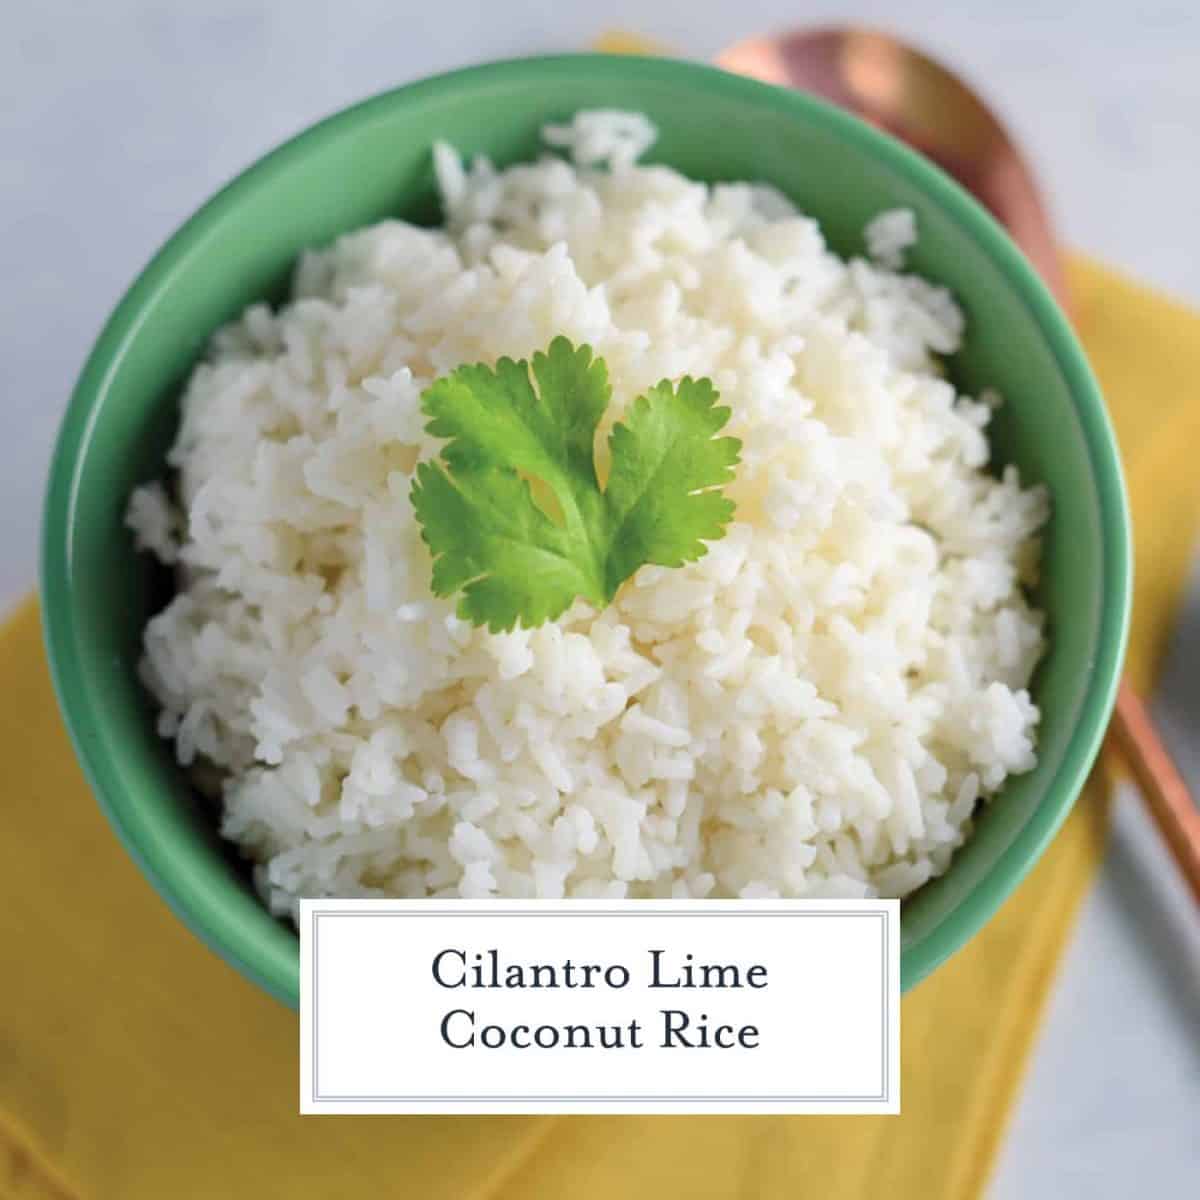 Cilantro Lime Coconut Rice uses coconut milk, fresh lime and cilantro for the best sticky rice recipe ever! Pairs with any Asian dish. #coconutrice #stickyrice #jasminerice www.savoryexperiments.com